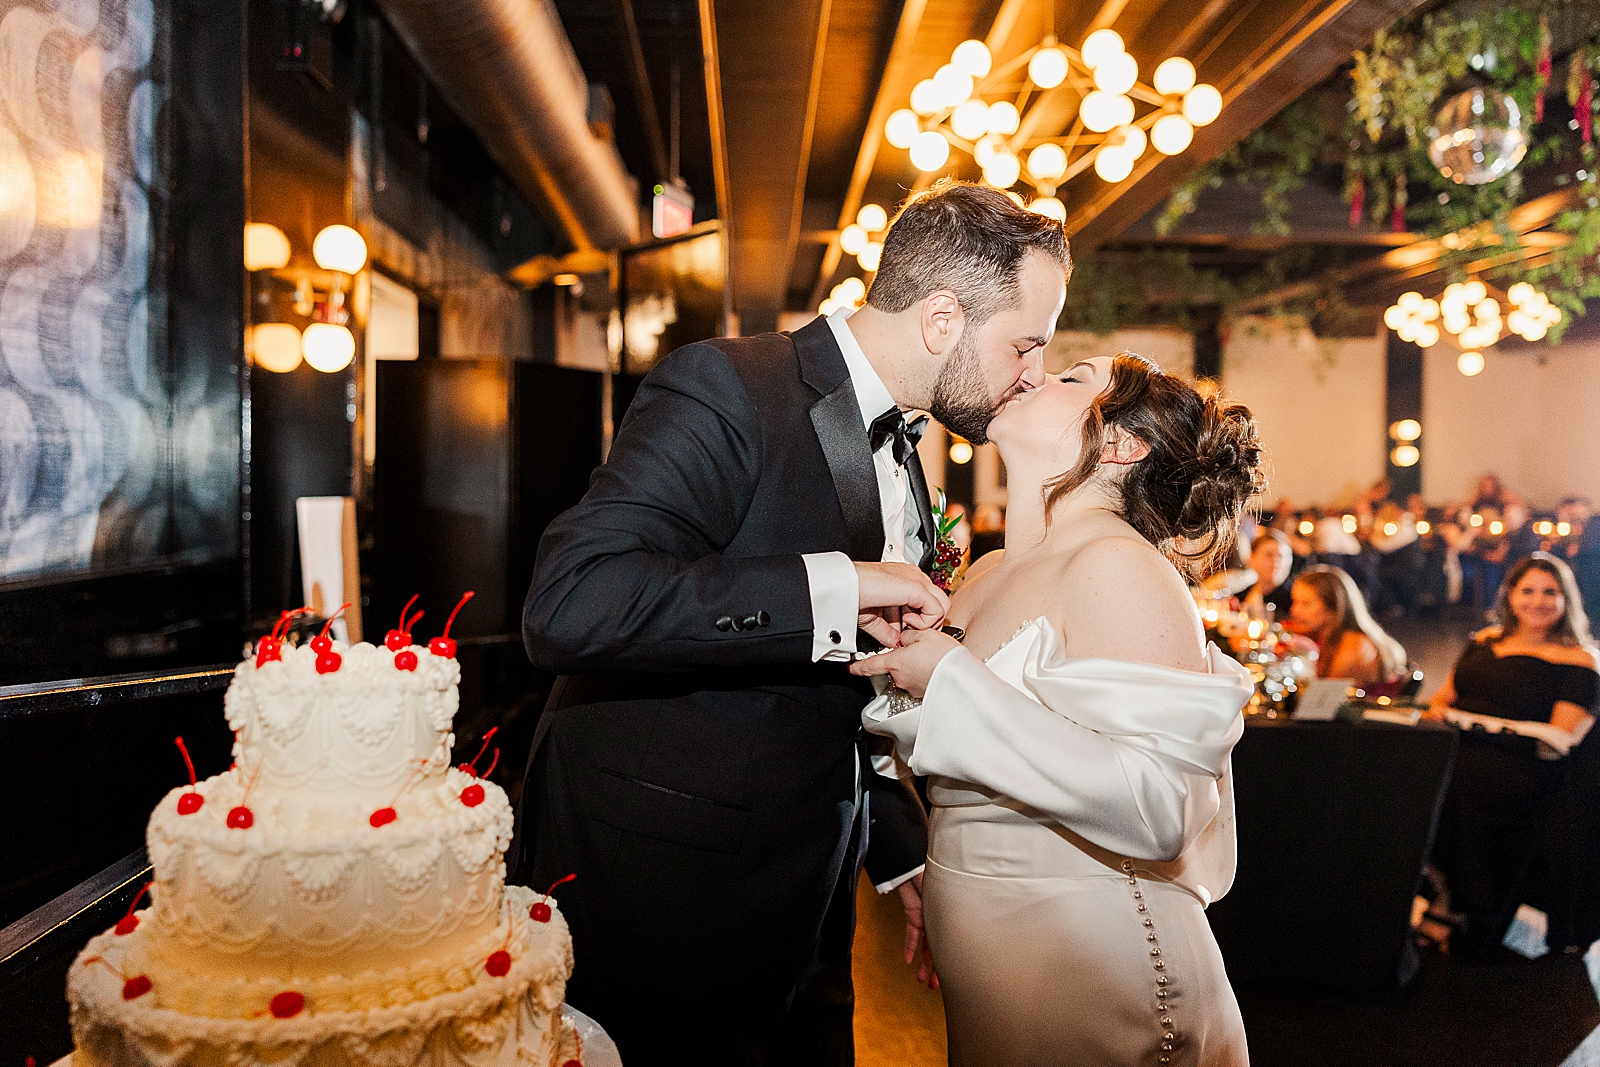 Upper body shot of the couple kissing behind their wedding cake. 